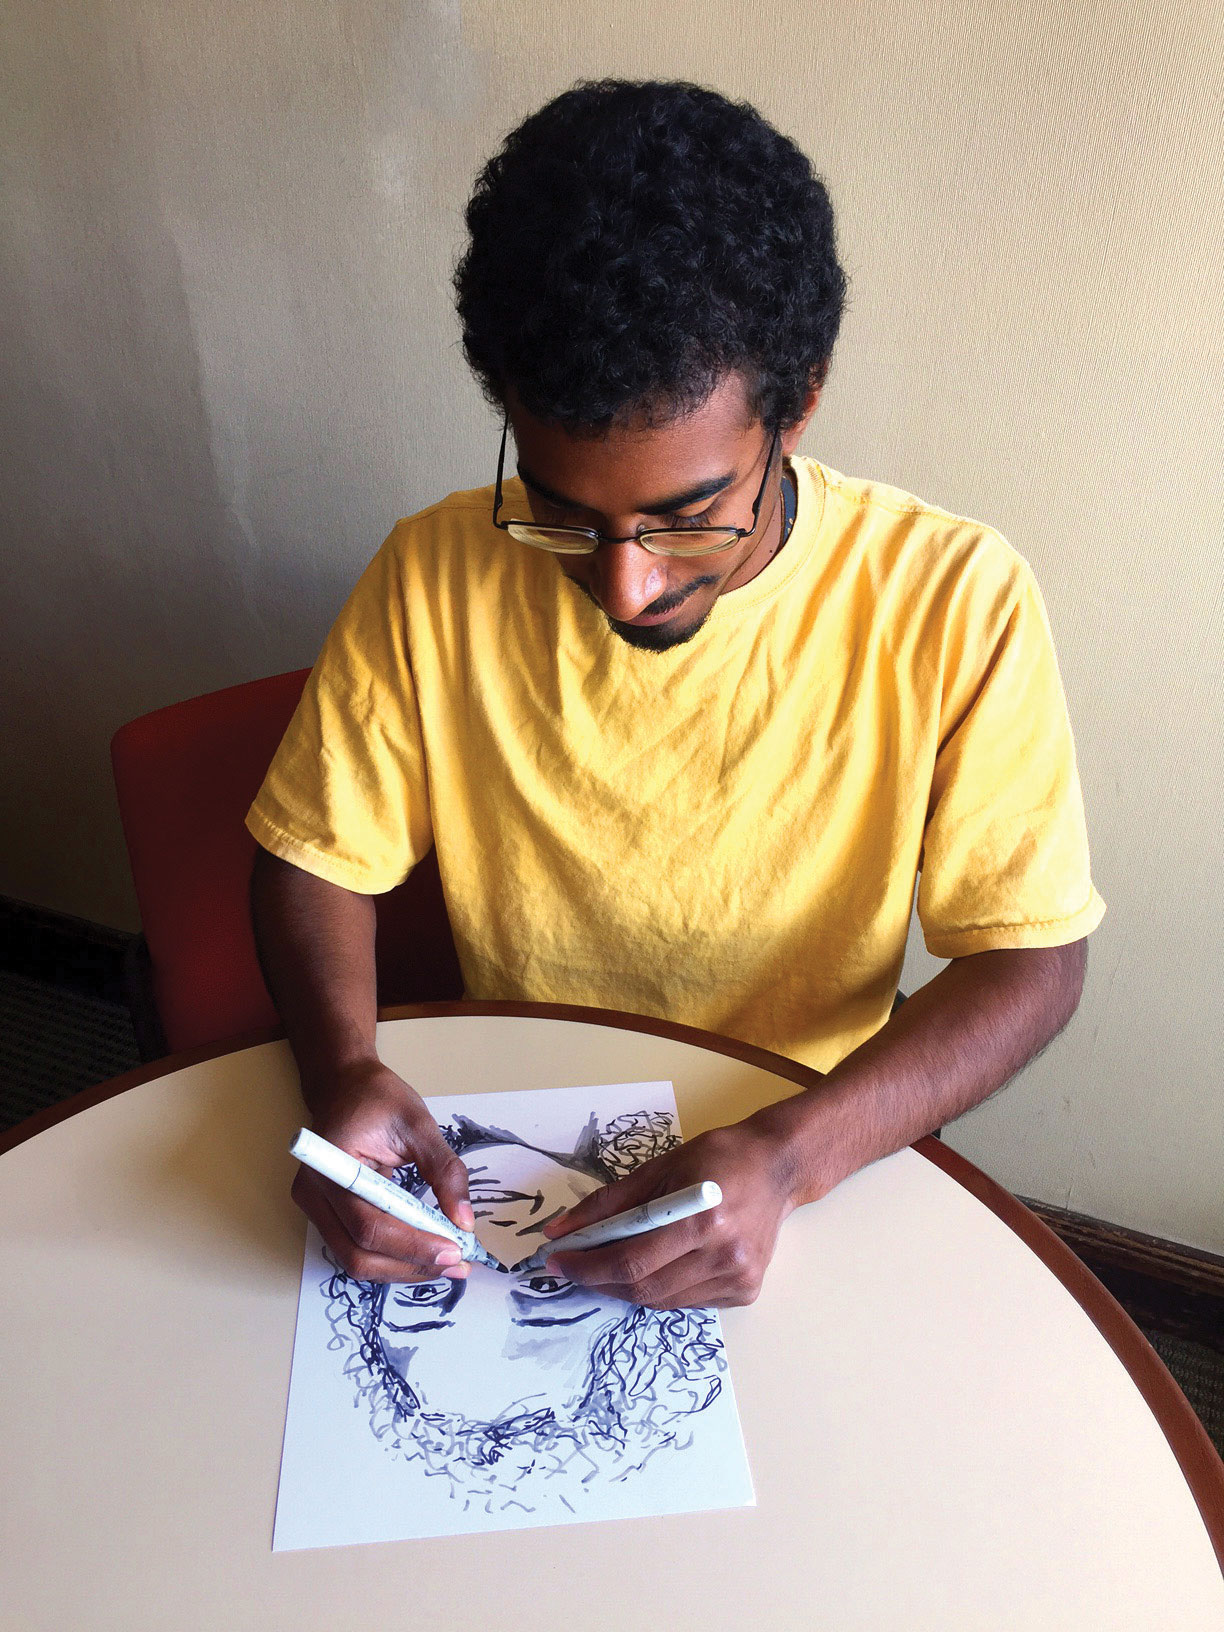 Photo of Randall drawing the portrait of a fellow I-House resident.